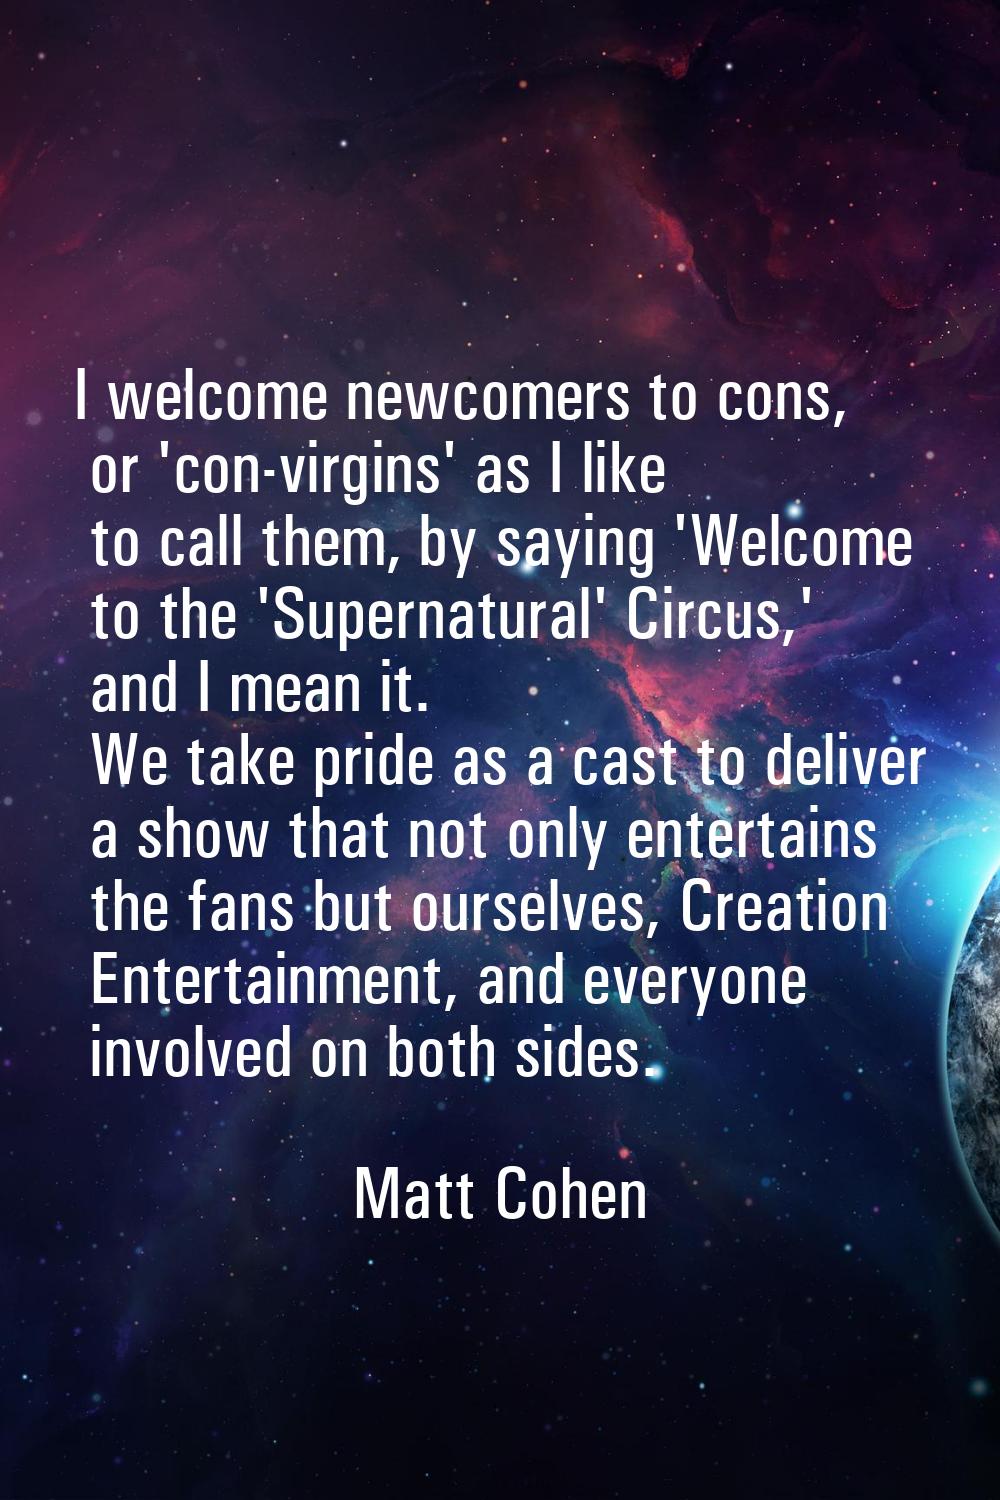 I welcome newcomers to cons, or 'con-virgins' as I like to call them, by saying 'Welcome to the 'Su